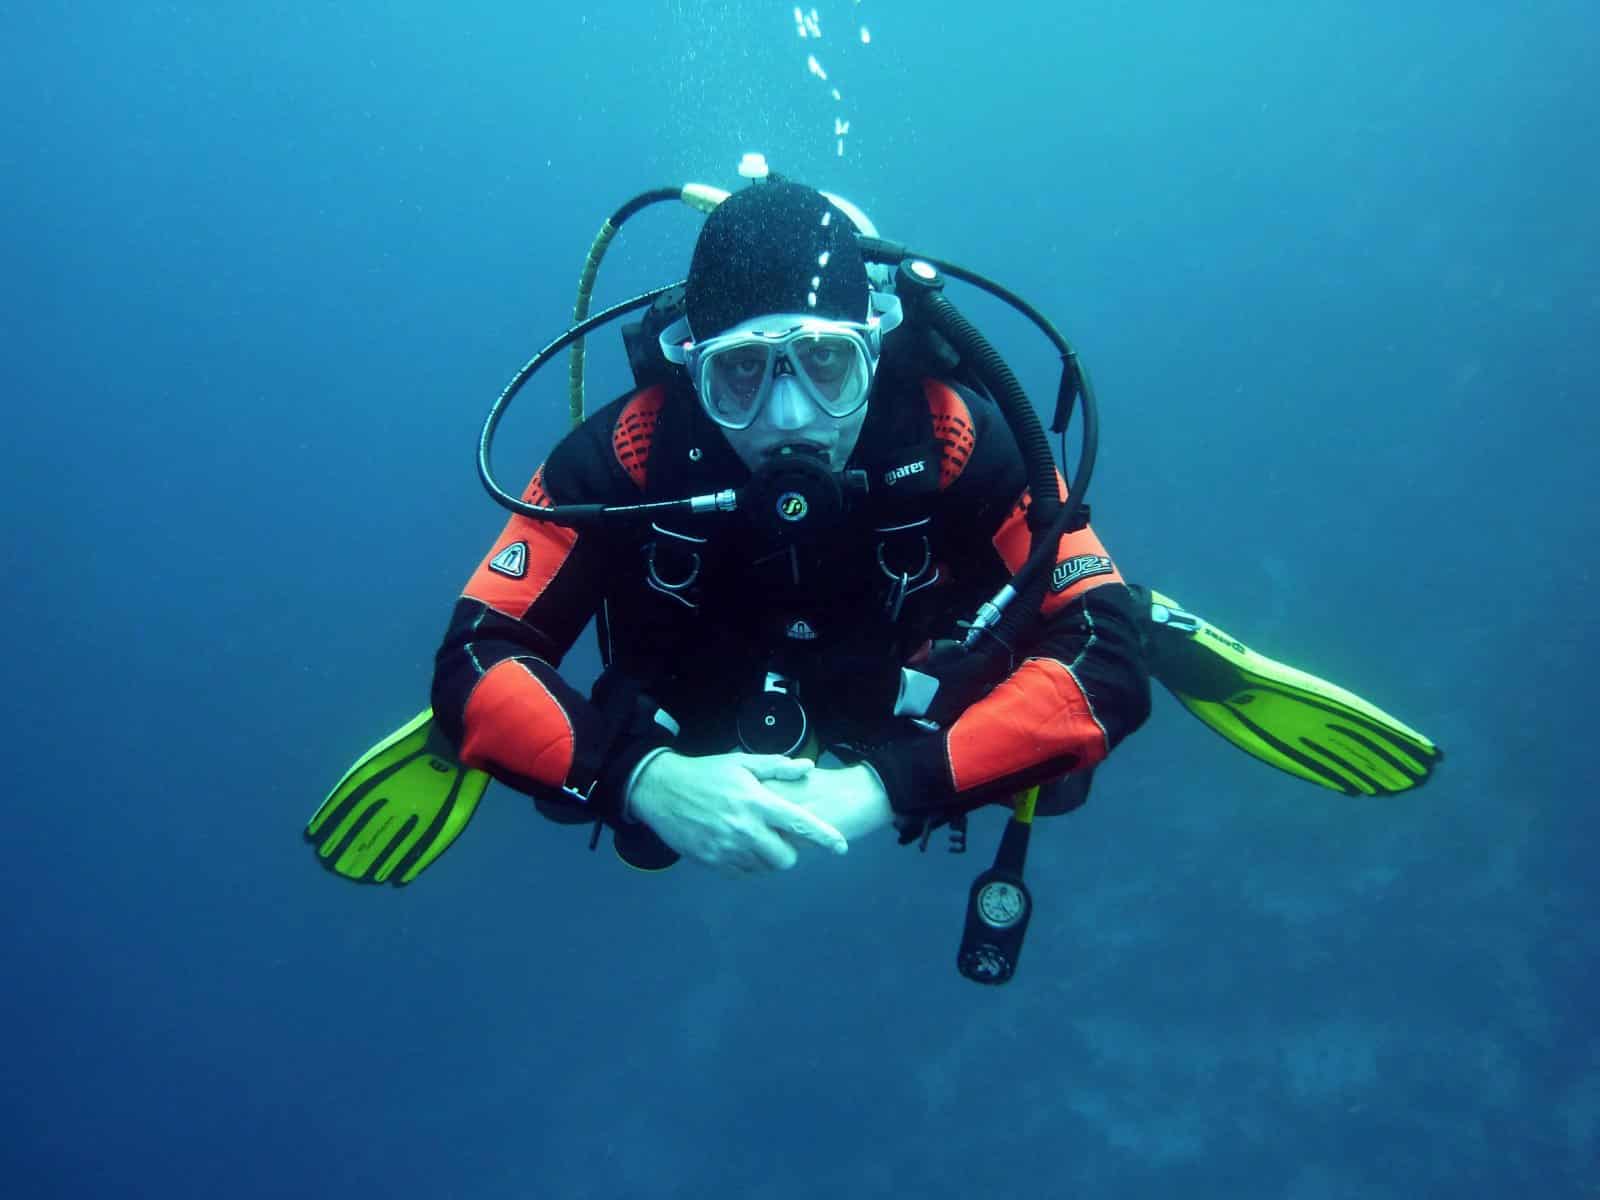 <p class="wp-caption-text">Image Credit: Pexels / Pixabay</p>  <p><span>Buoyancy control is arguably the most important skill in scuba diving. Achieving neutral buoyancy allows divers to hover effortlessly in the water, minimizing energy expenditure and reducing the risk of damaging marine life. It requires a good understanding of adjusting your buoyancy control device and proper weighting.</span></p> <p><b>Insider’s Tip:</b><span> Practice in a pool or calm shallow water before attempting more challenging dives. Focus on breathing techniques, as your breath control plays a significant role in maintaining neutral buoyancy.</span></p>